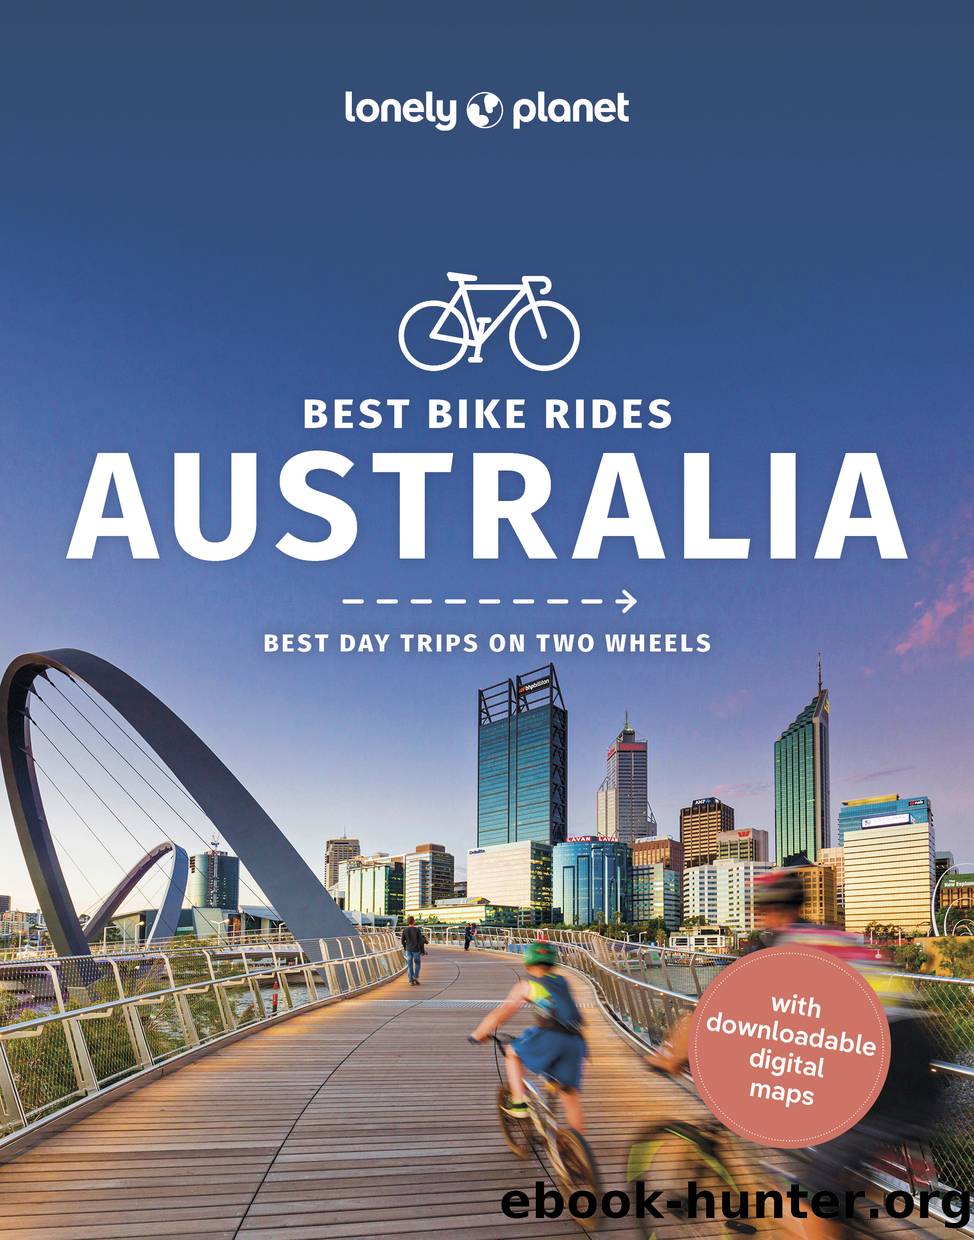 Lonely Planet Best Bike Rides Australia by Lonely Planet